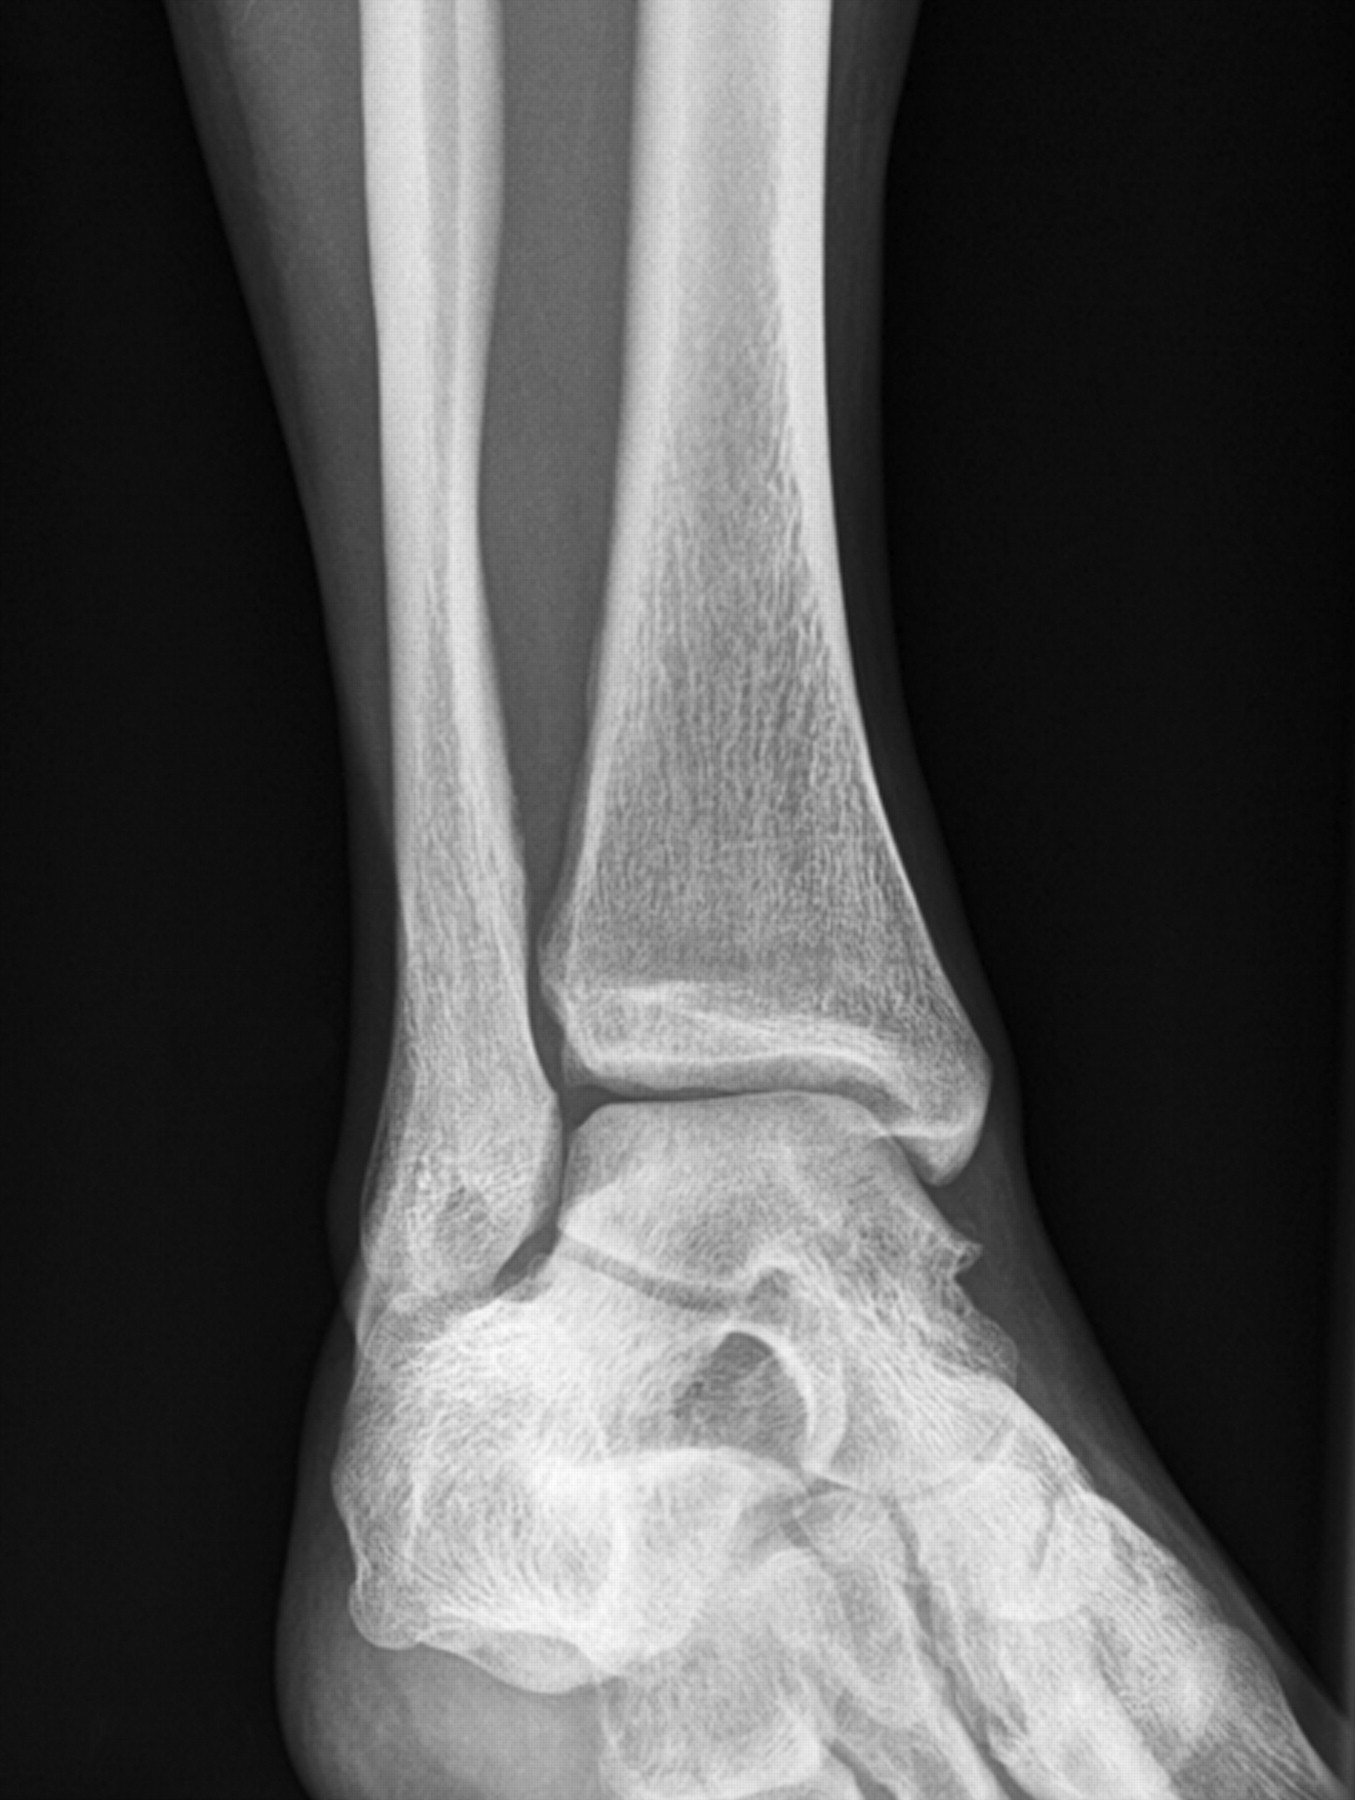 Fig. 2 
          Plain radiographs post-operatively of
a 32-year-old female patient who sustained a Weber B fracture of
the left ankle, with no overlap existing between the tibia and fibula,
showing a) the left ankle, which showed no increase in the distance
between the tibia and fibula or increase of the medial clear space
during intra-operative testing and b) the right ankle, showing that
the condition was present on the right side, which had no history
of trauma, pain or previous surgery.
        